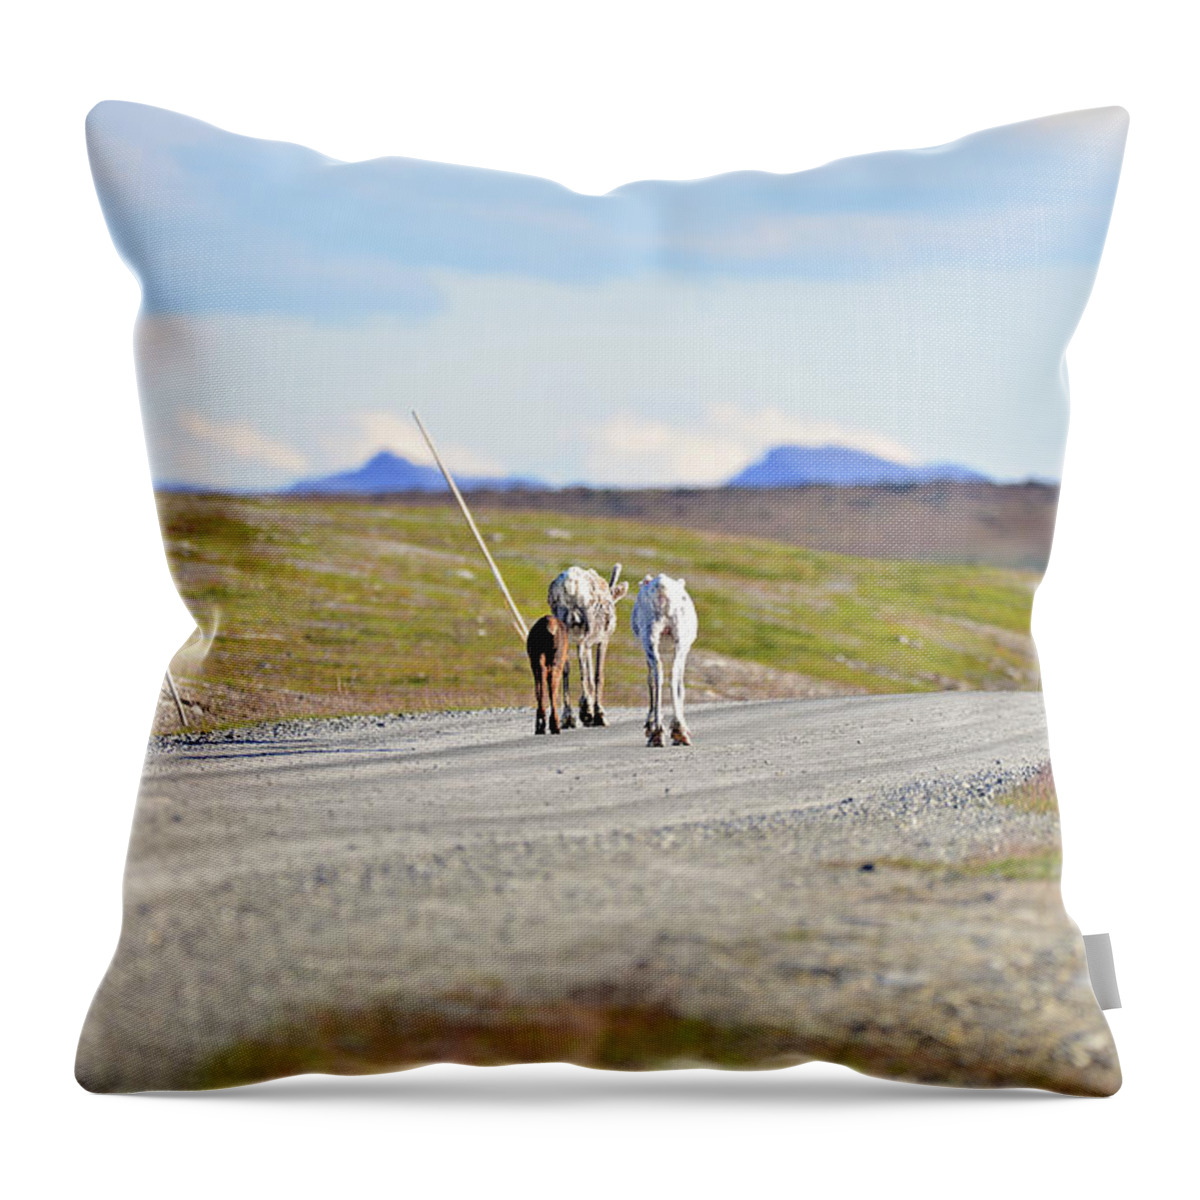 Sweden Throw Pillow featuring the pyrography On the way by Magnus Haellquist